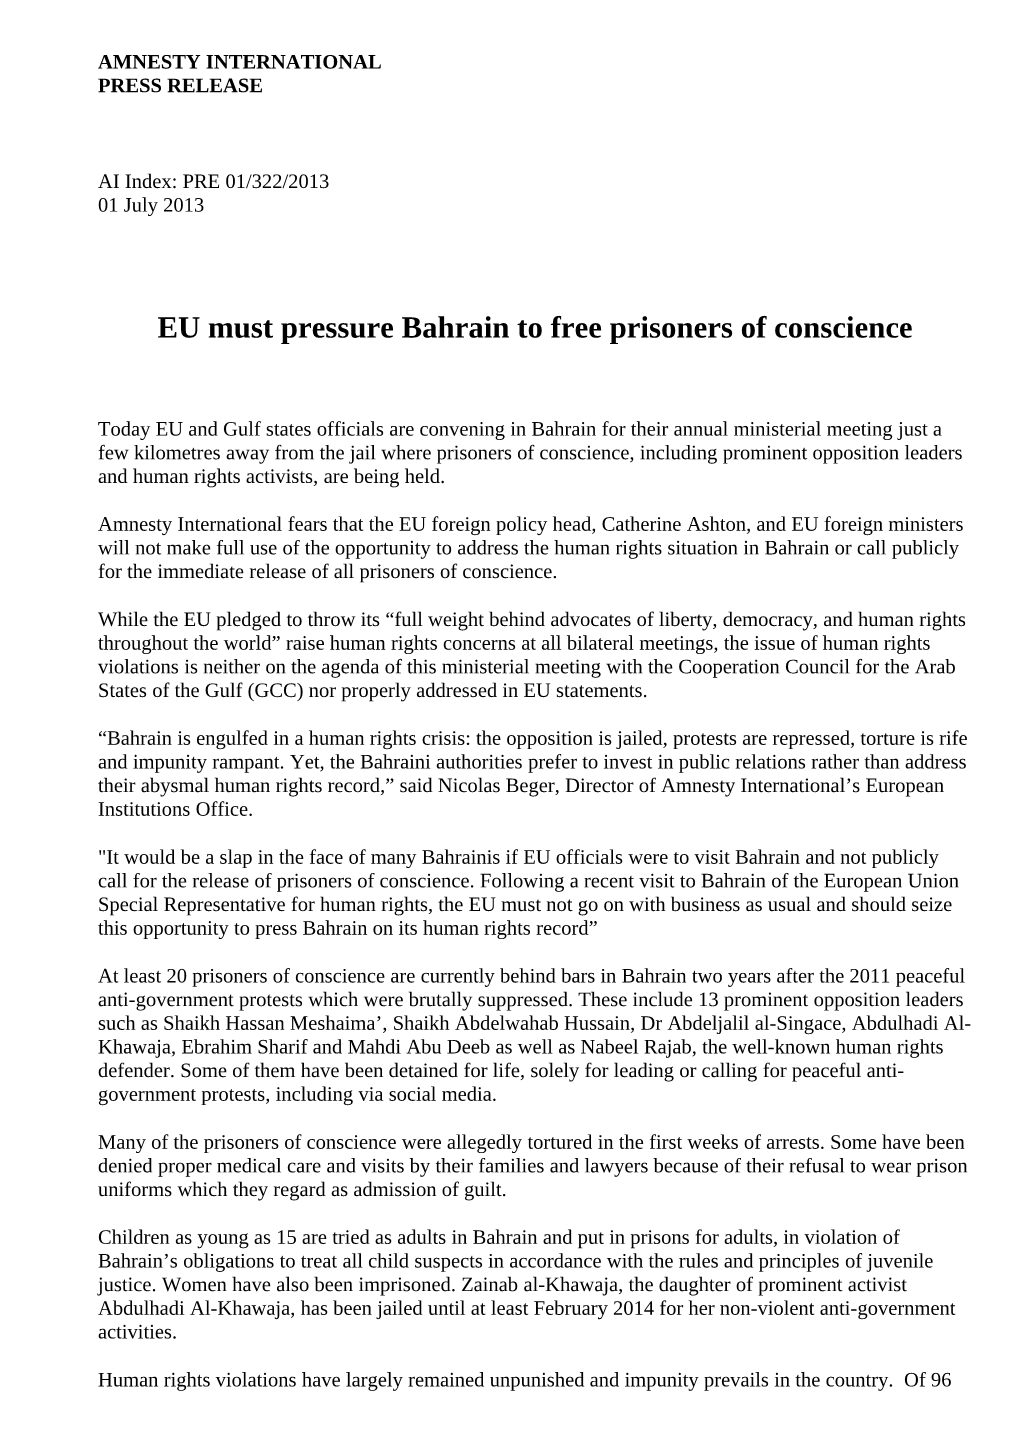 EU Must Pressure Bahrain to Free Prisoners of Conscience